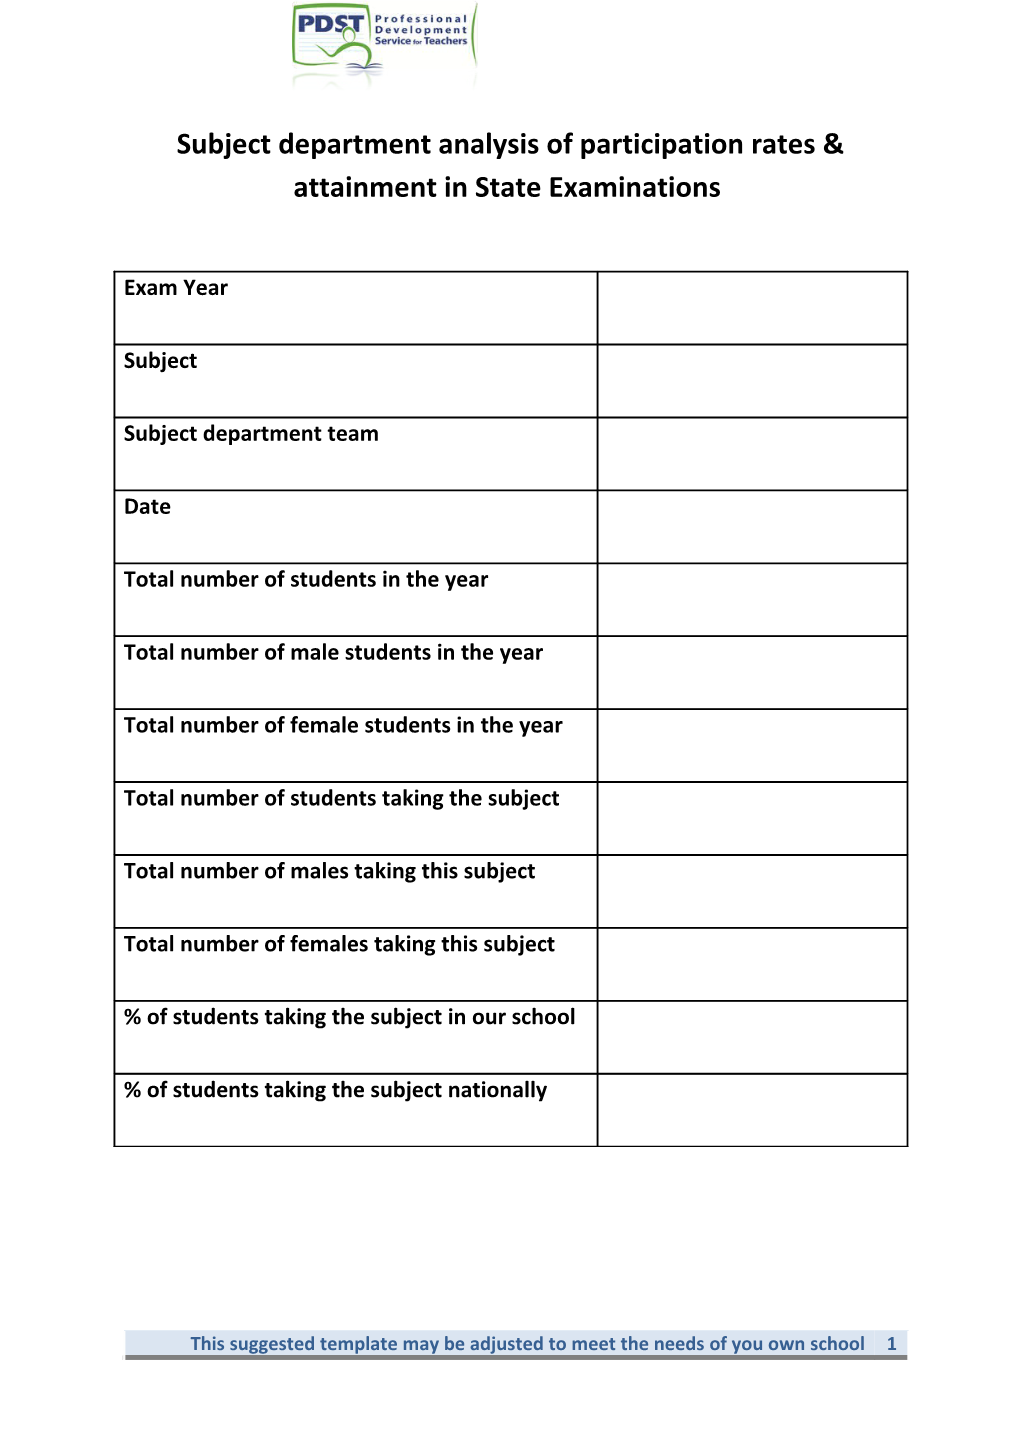 This Suggested Template May Be Adjusted to Meet the Needs of You Own School